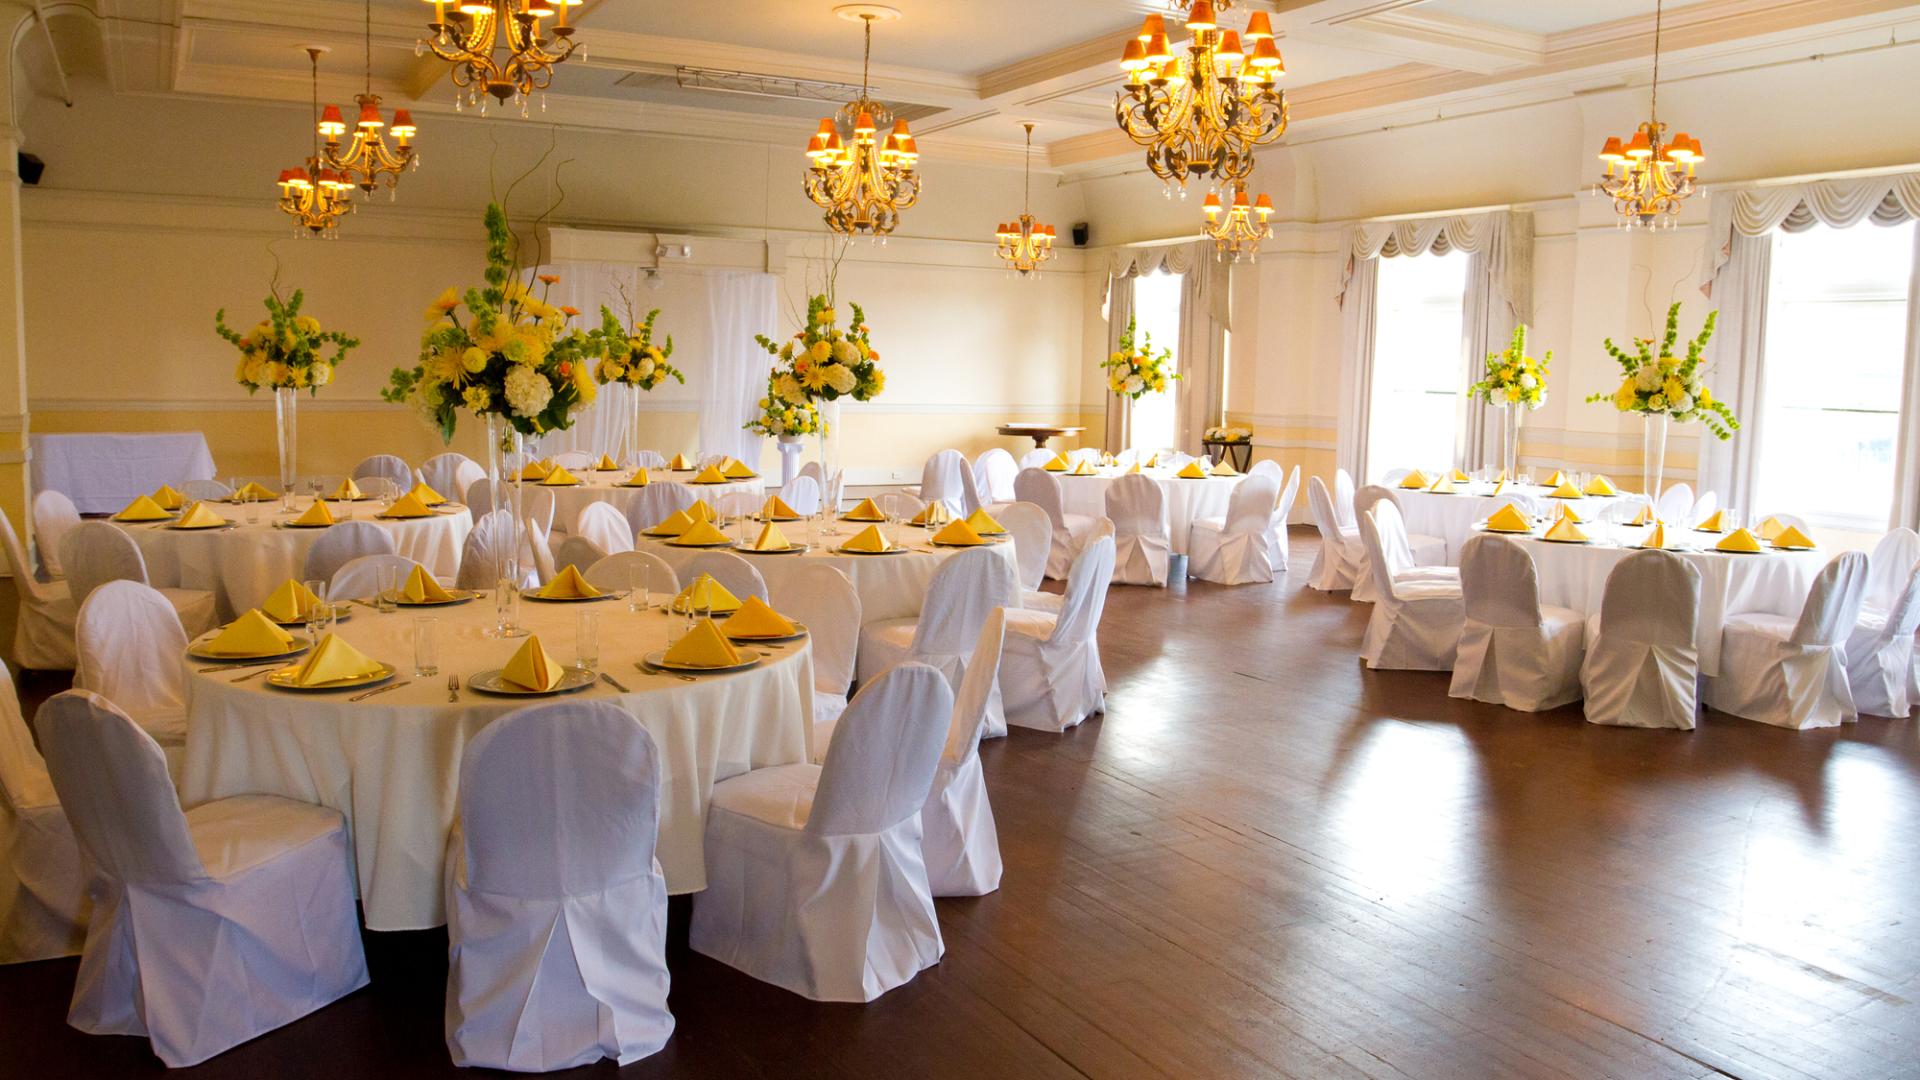 Christening Party Venues for Rent in Washington, DC